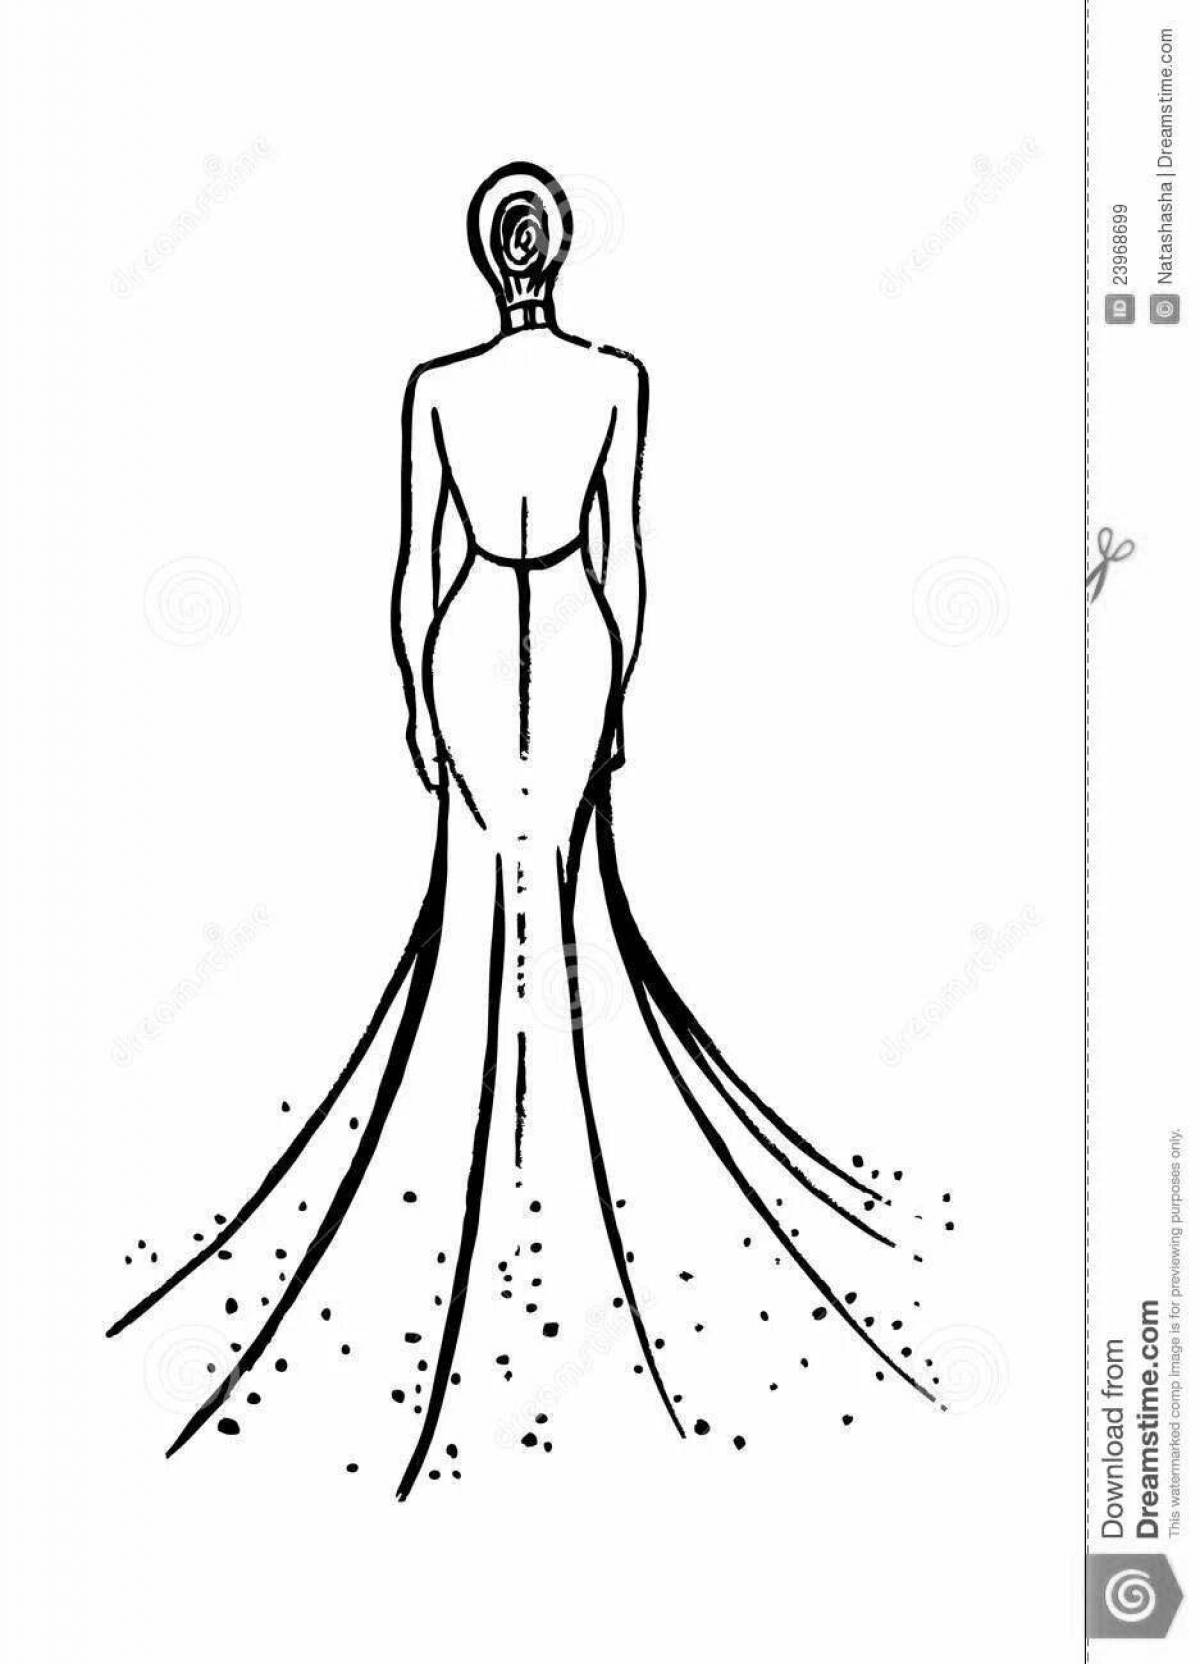 Dazzling coloring of the silhouette of a girl in a dress